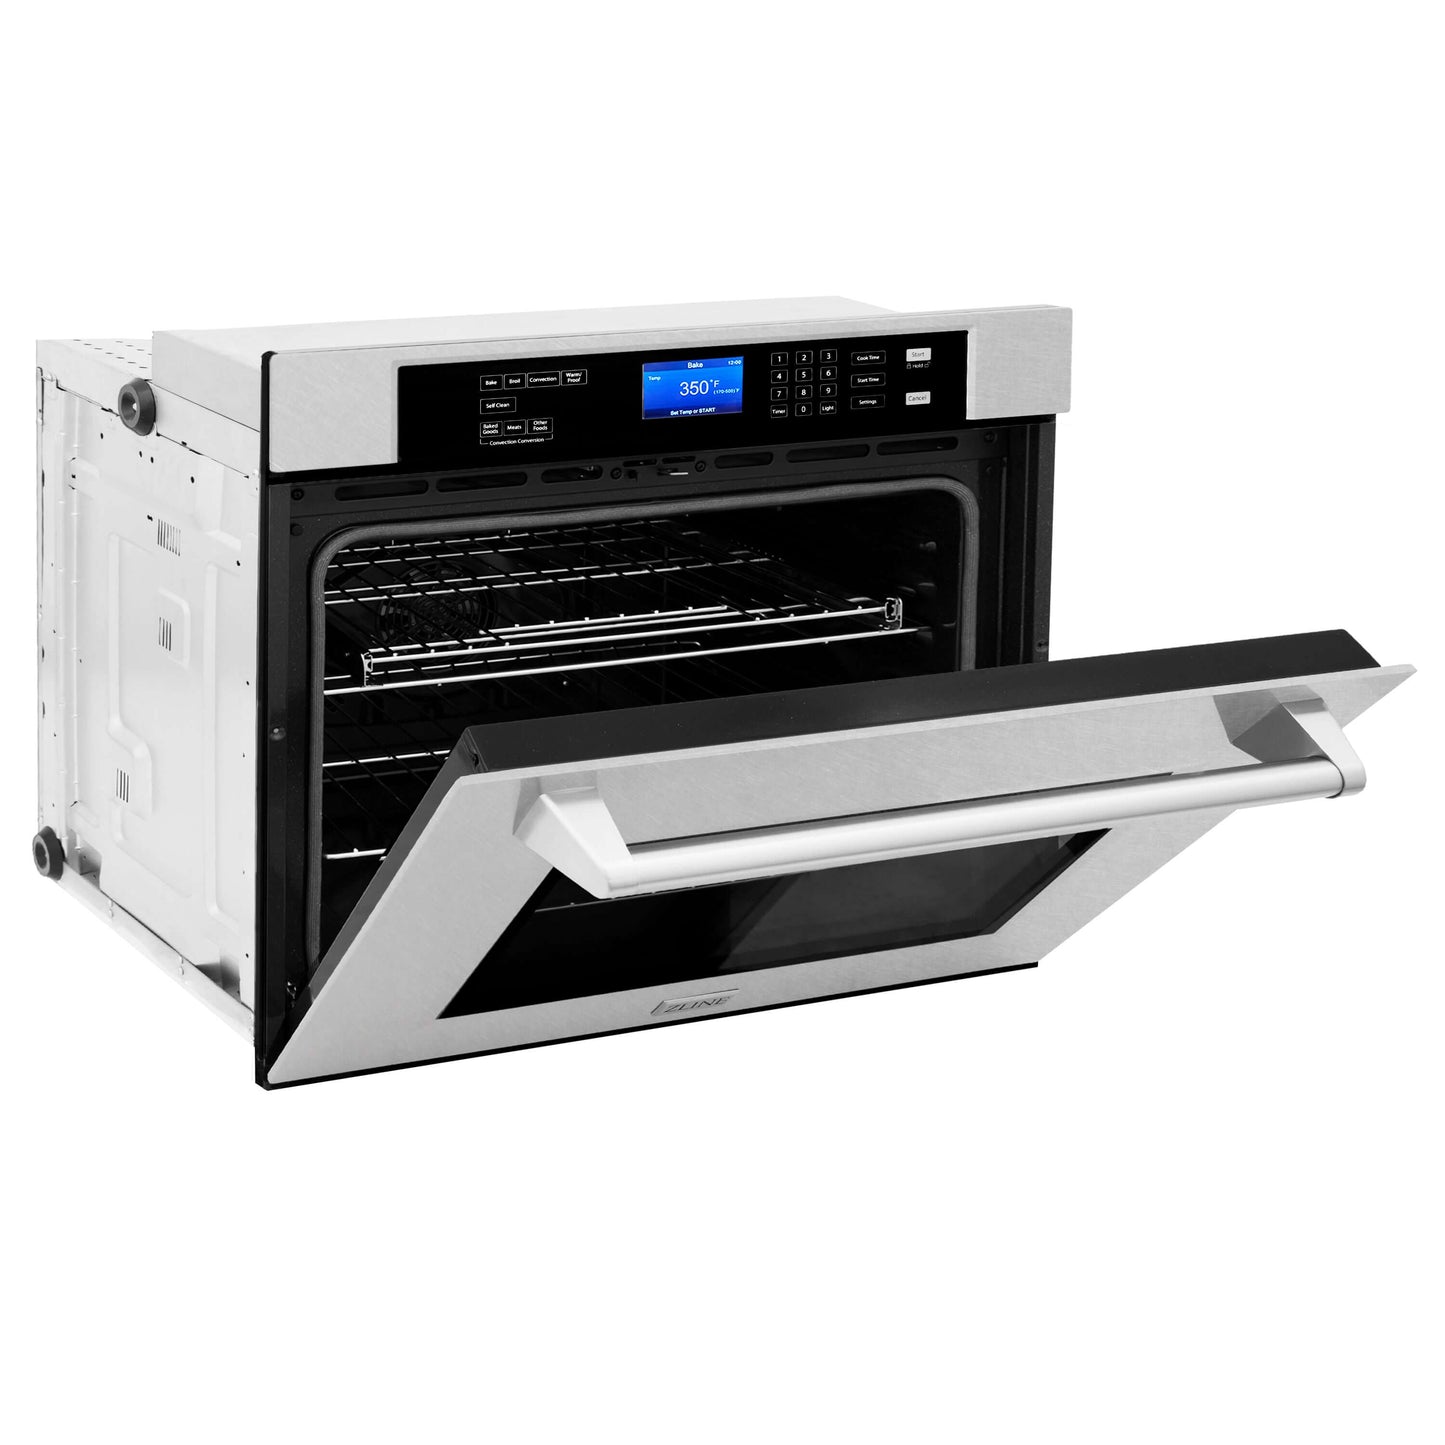 ZLINE 30 in. Professional Electric Single Wall Oven with Self Clean and True Convection in Fingerprint Resistant Stainless Steel (AWSS-30)